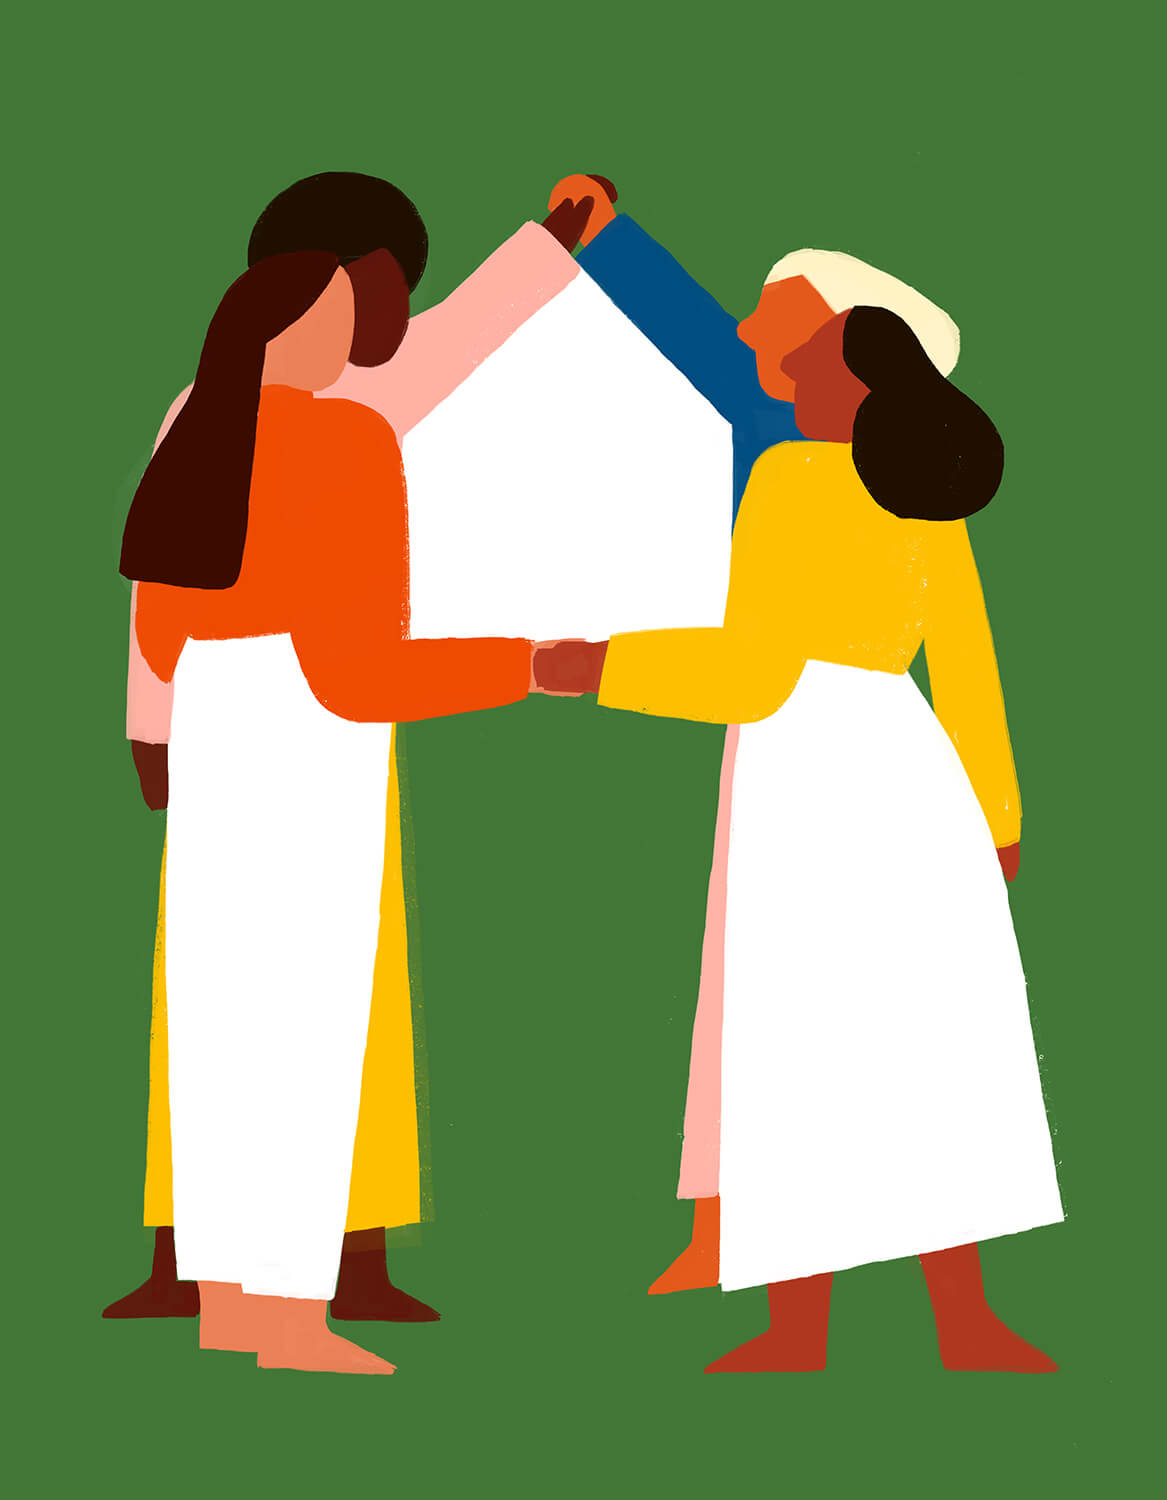 home-family-people-together-illustration-violeta-noy-thumbnail